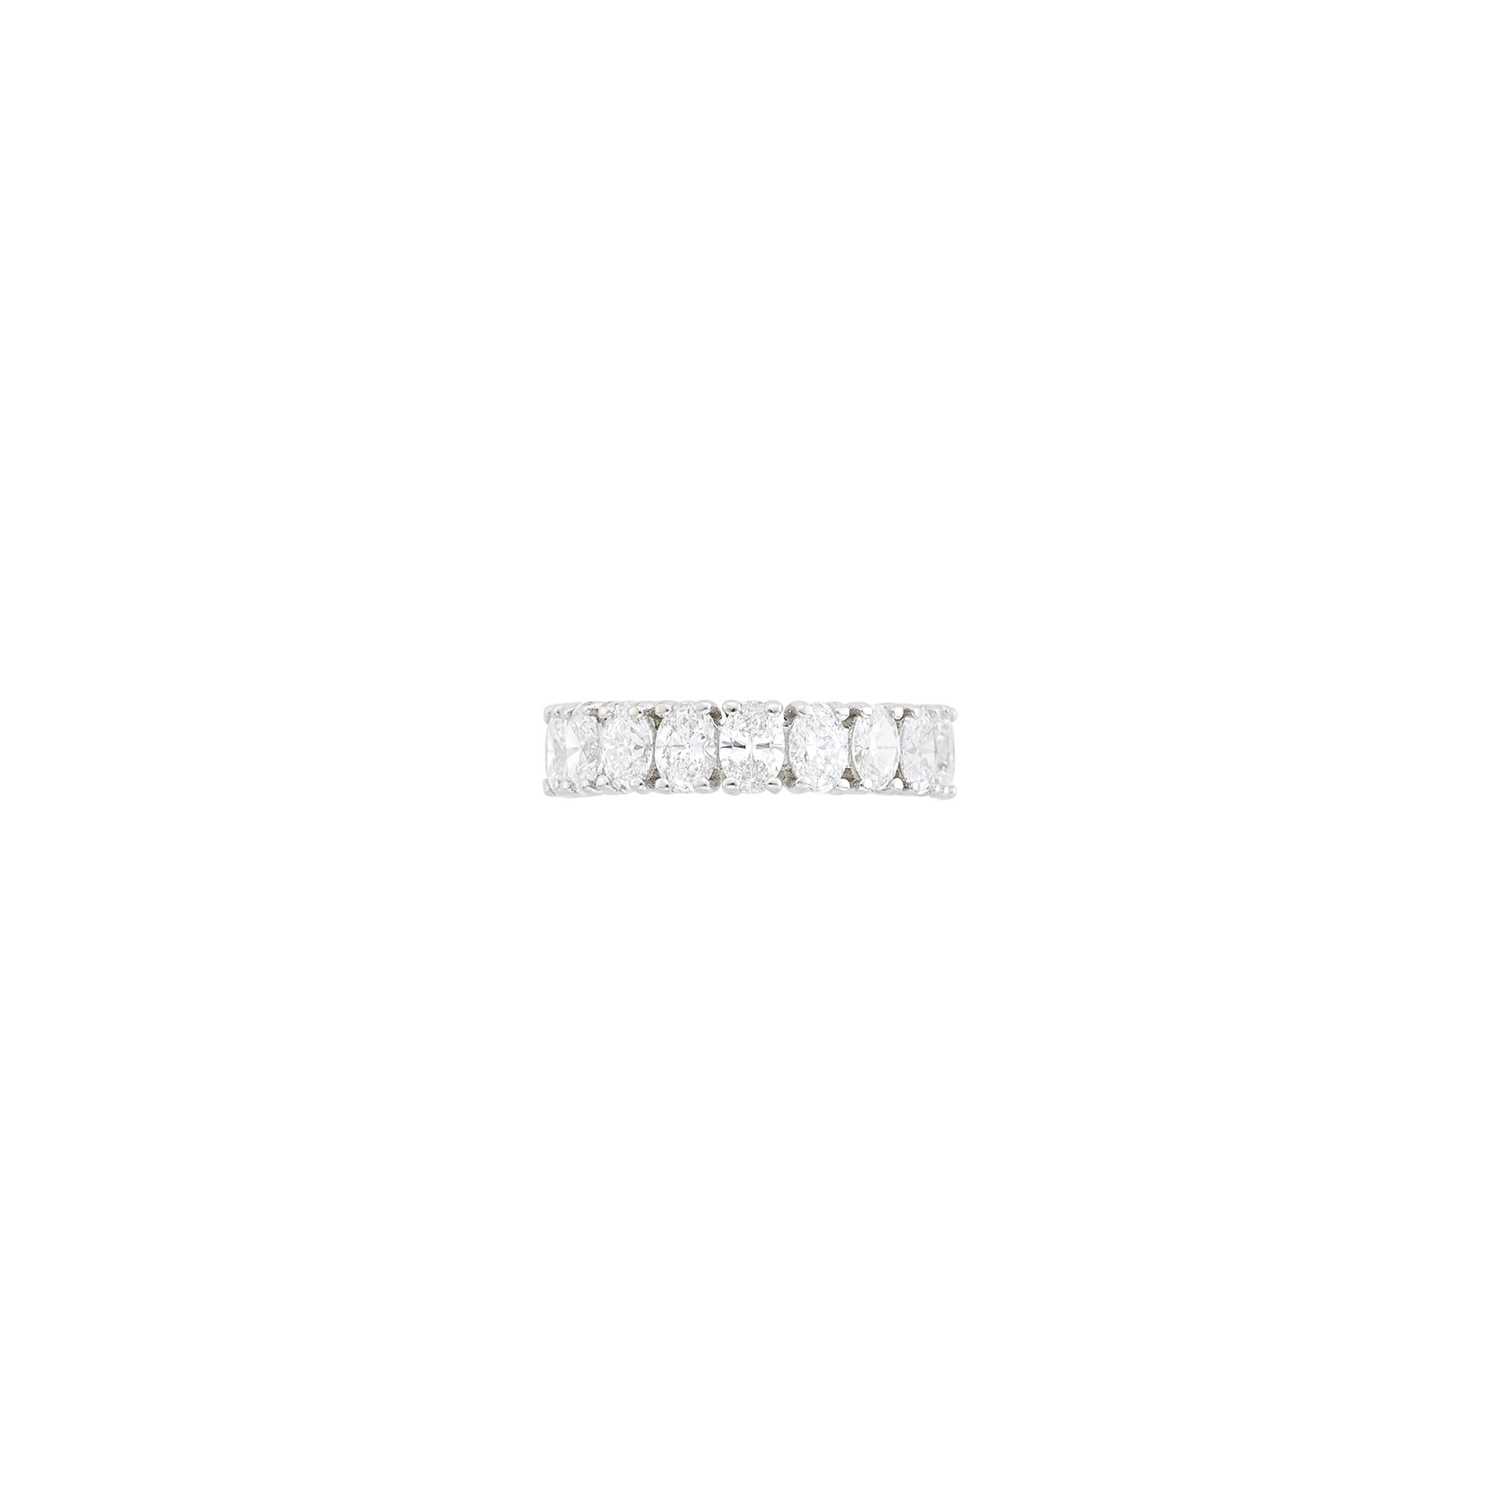 Lot 93 - Harry Winston White Gold and Diamond Band Ring